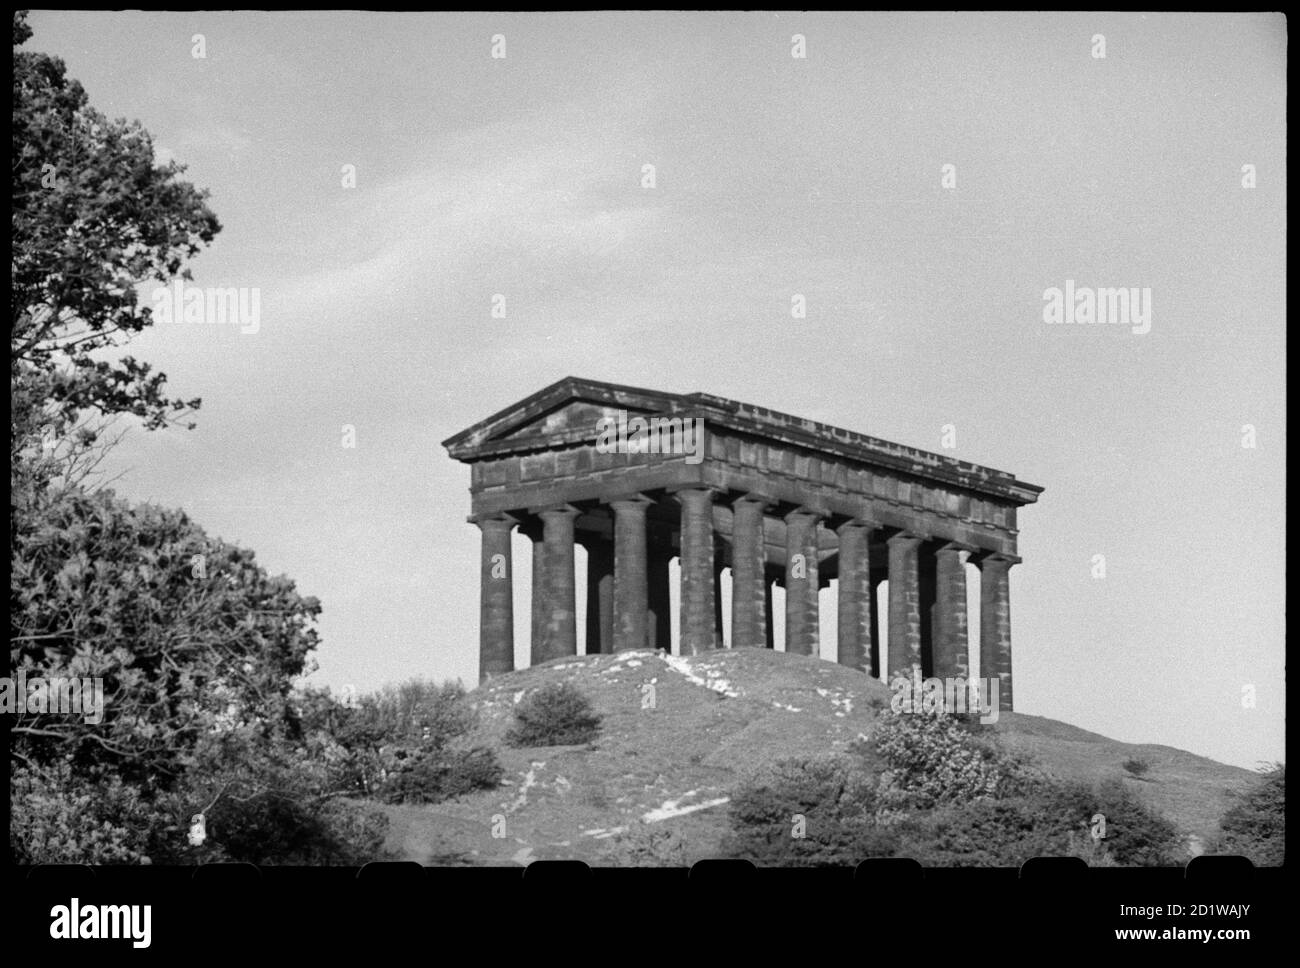 Earl Of Durham's Monument, Hill Lane, Sunderland. A general view of the Earl of Durham's Monument, also known as Penshaw Monument, a built for the Earl of Durham in the style of a Greek temple, seen from the base of Penshaw Hill. Stock Photo